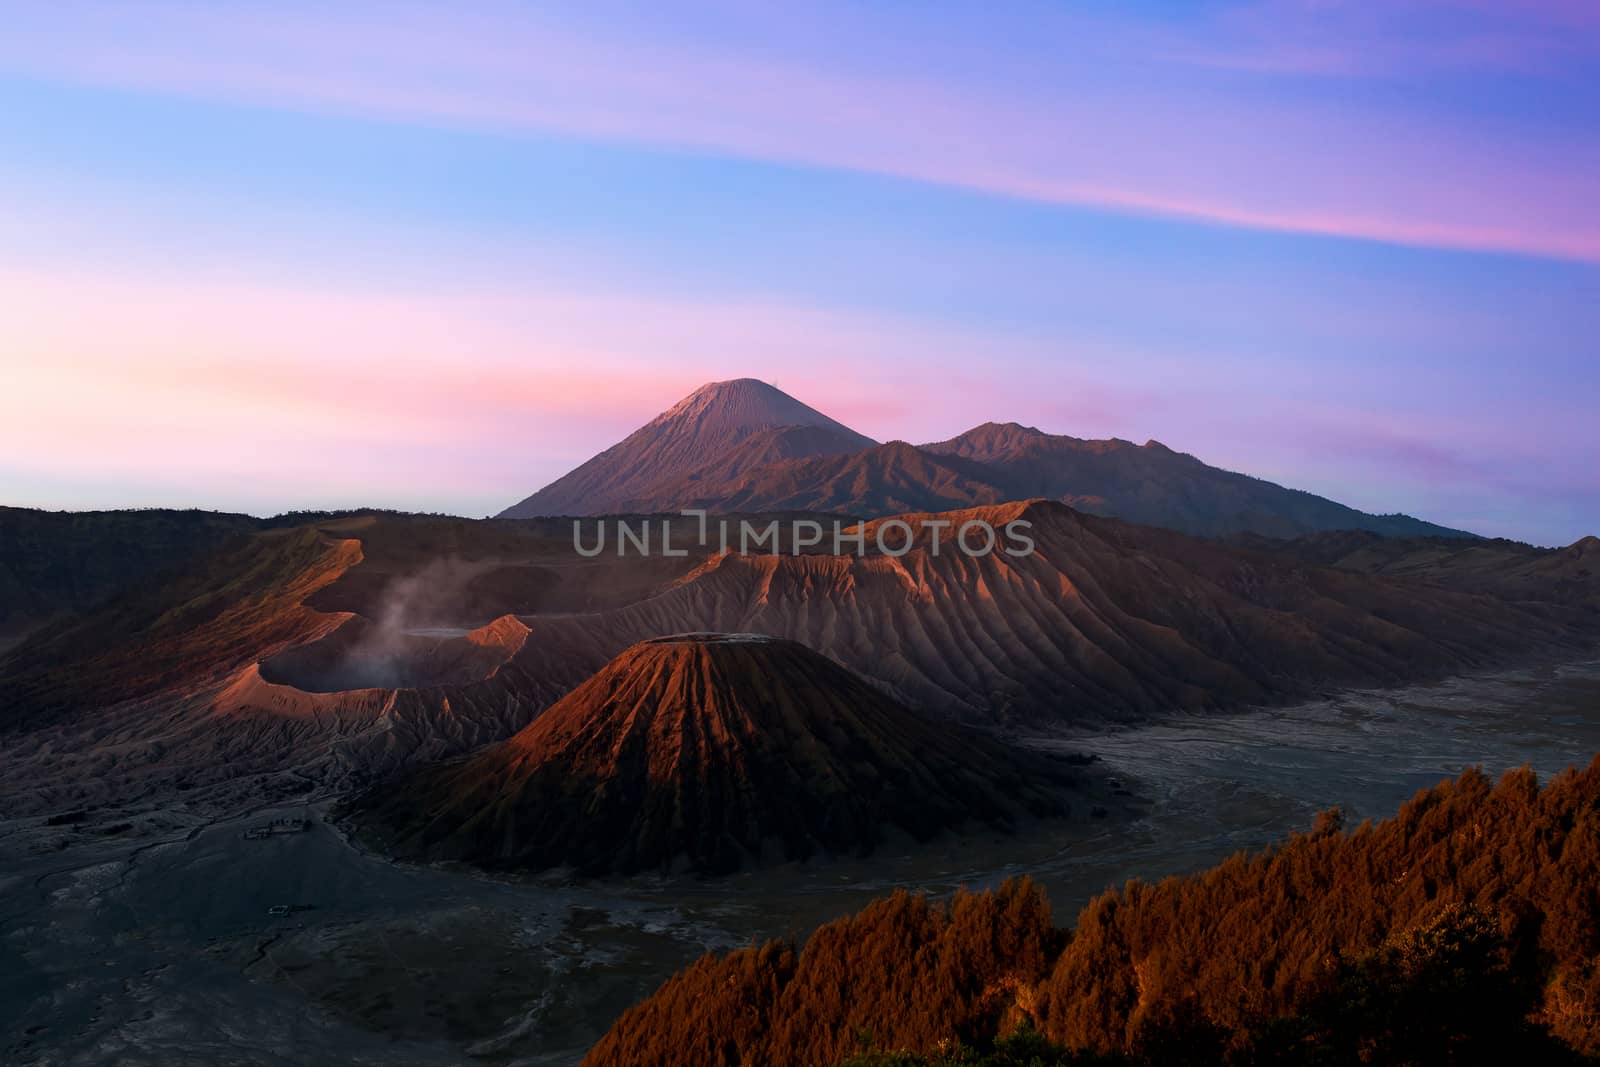 Mount Bromo volcano (Gunung Bromo) during sunrise from viewpoint by freedomnaruk